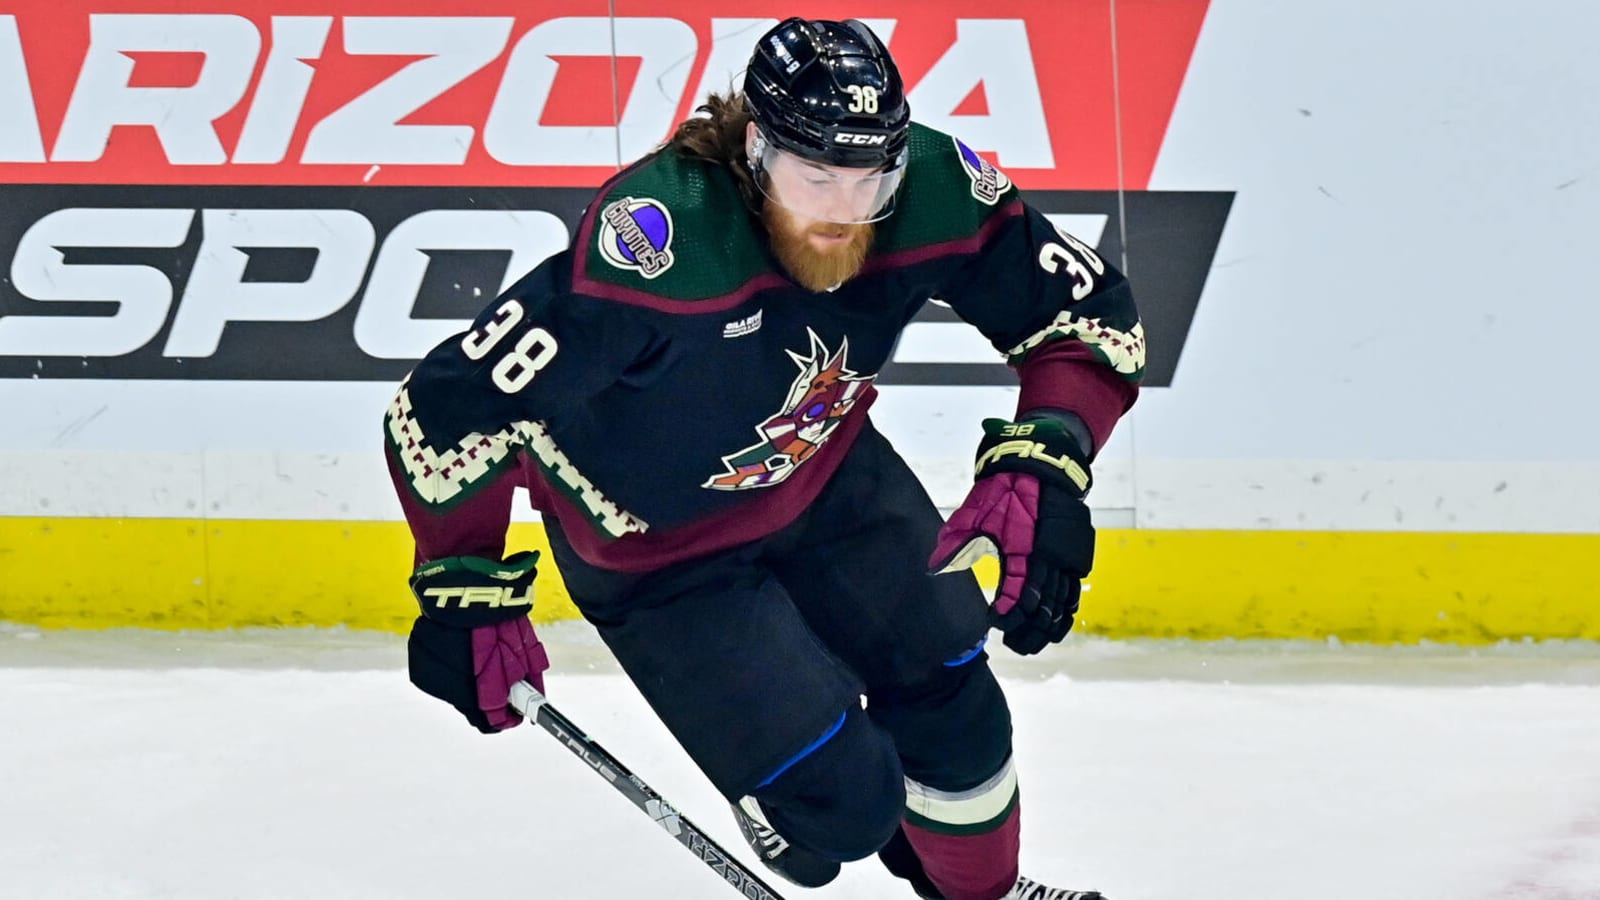 Coyotes forward Liam O’Brien fined $2,018.23 for roughing Vancouver’s Sam Lafferty